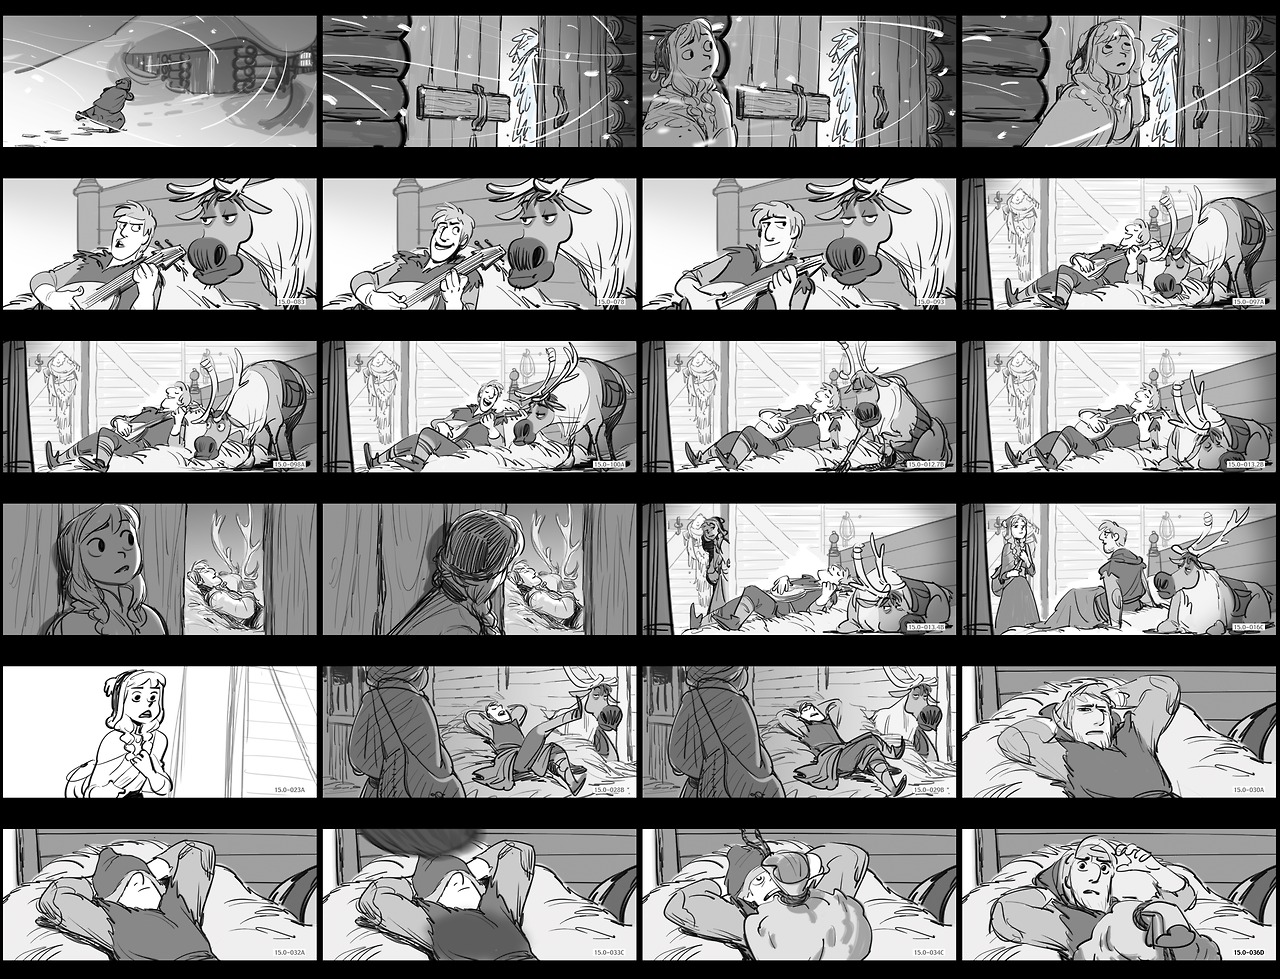 Frozen - “Anna hires Kristoff” sequence Storyboard